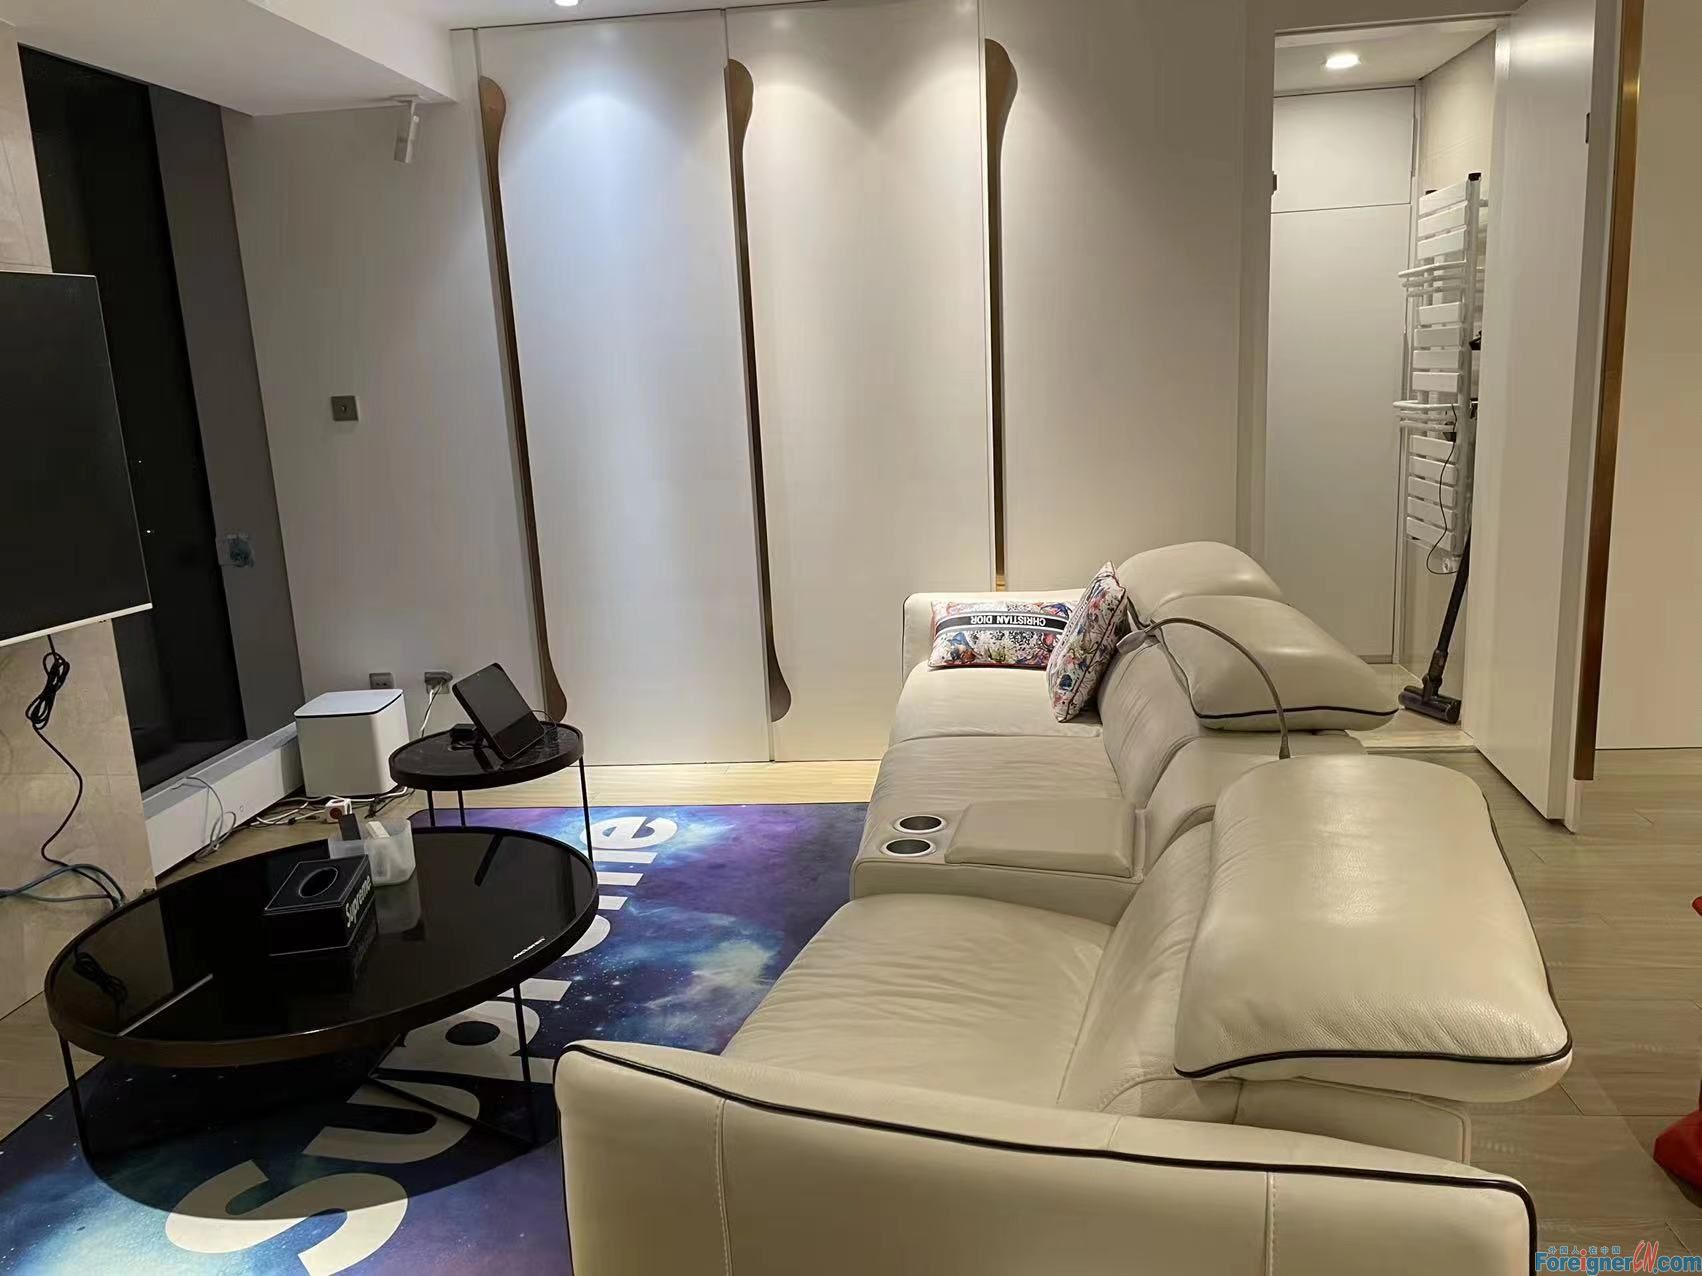 Terrific!!! nice house rent in Suzhou /Modern style/open view /2 bedrooms and 1 bathroom/ Xinghai Square/Suzhou Center Shopping Center/Camel bar